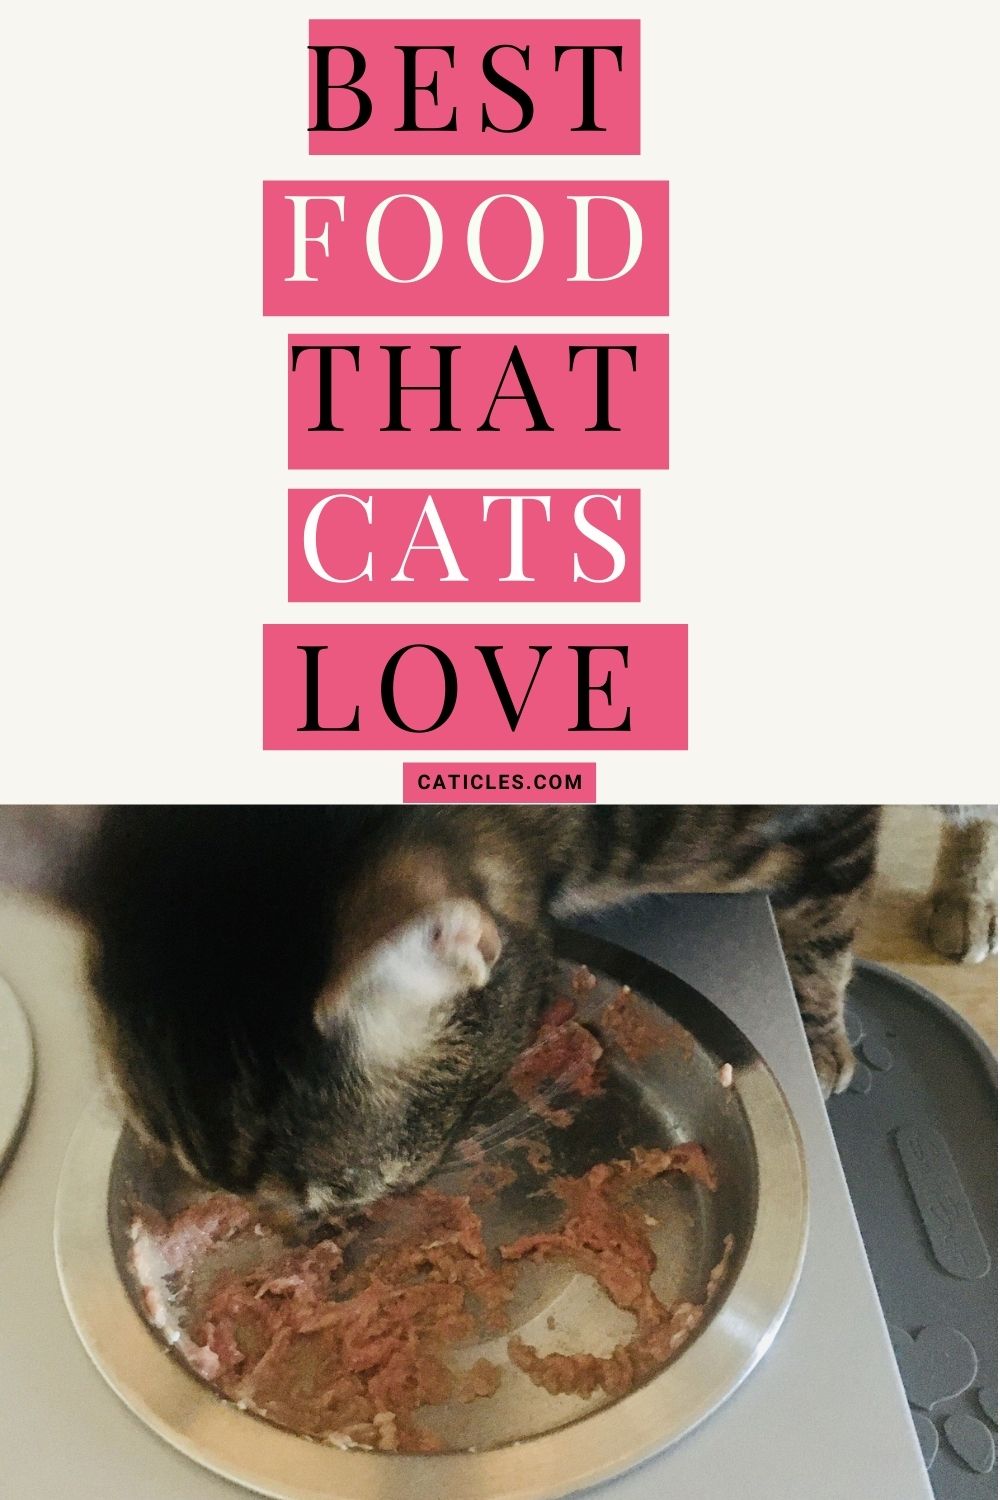 What Food do Cats Love? Best Food for Cats Guide] CATICLES